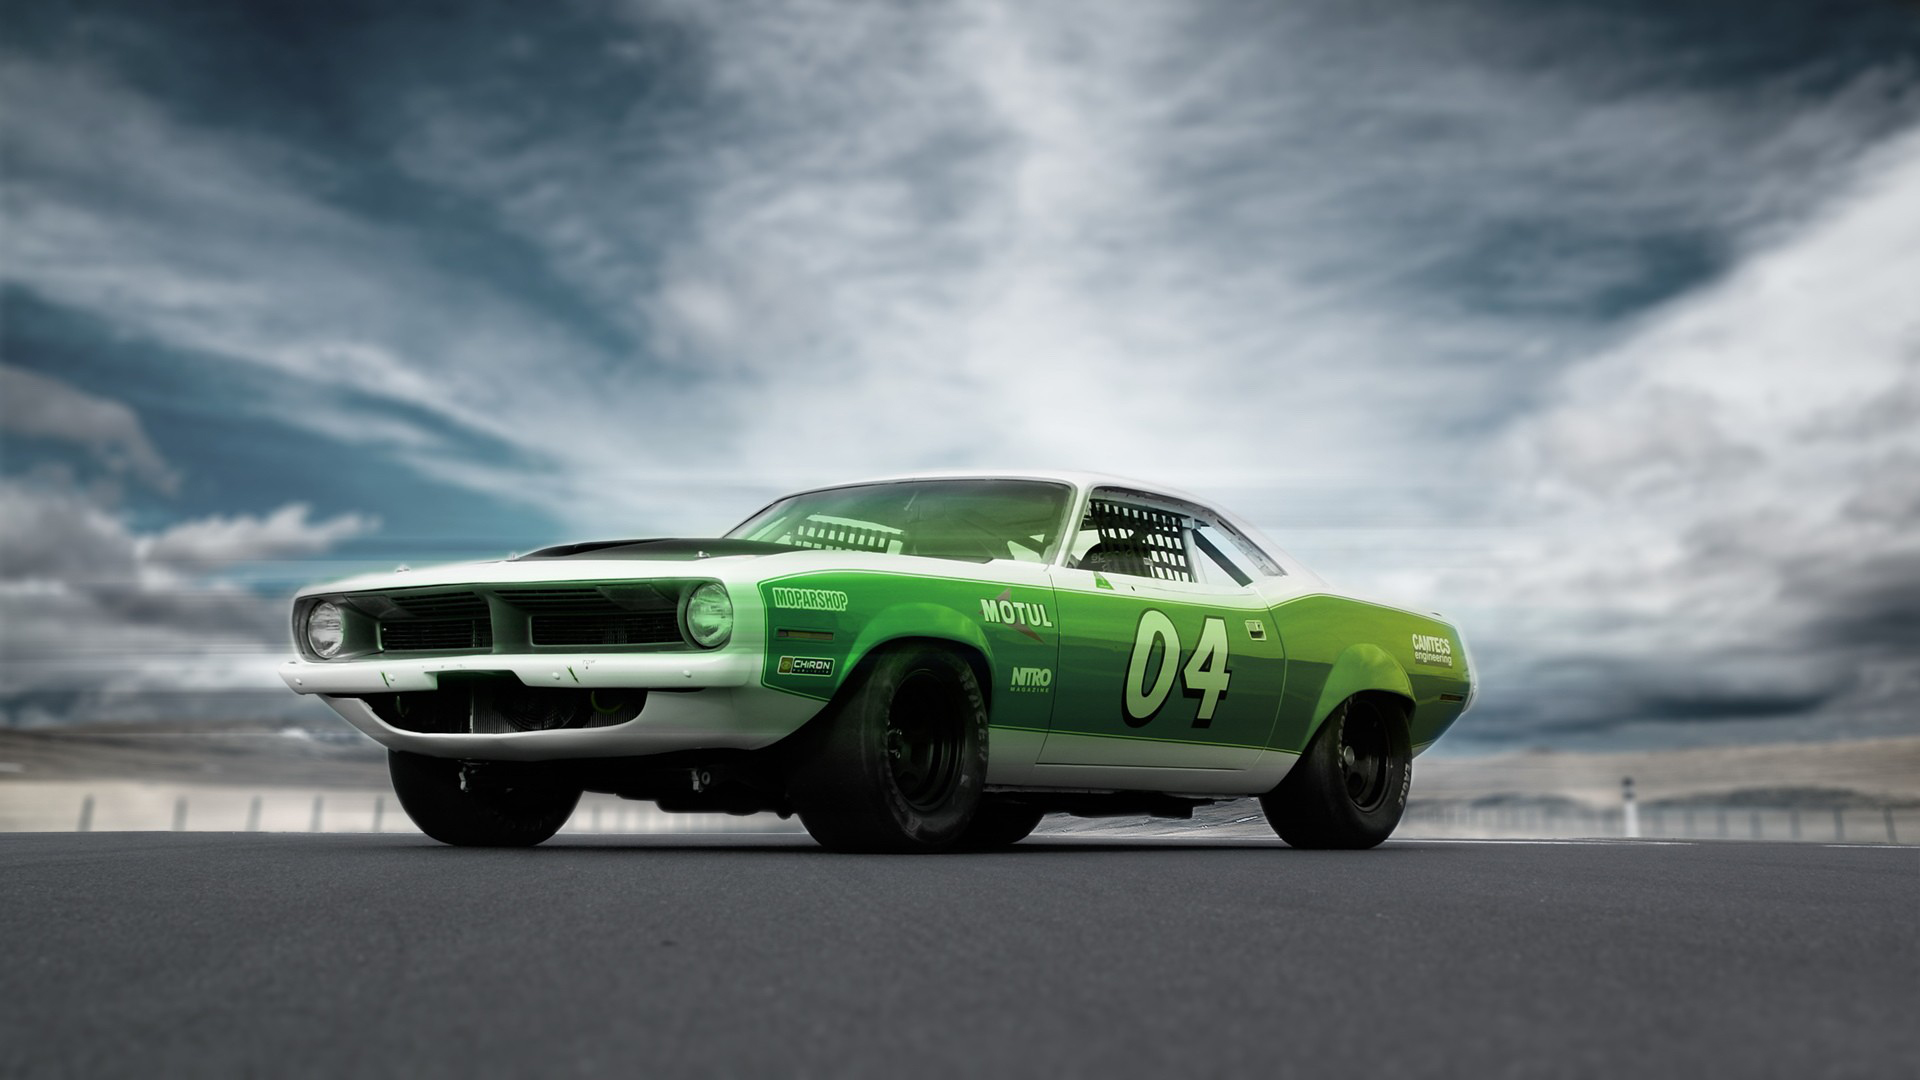 Old Car Wallpapers Hd | Hd Wallpapers